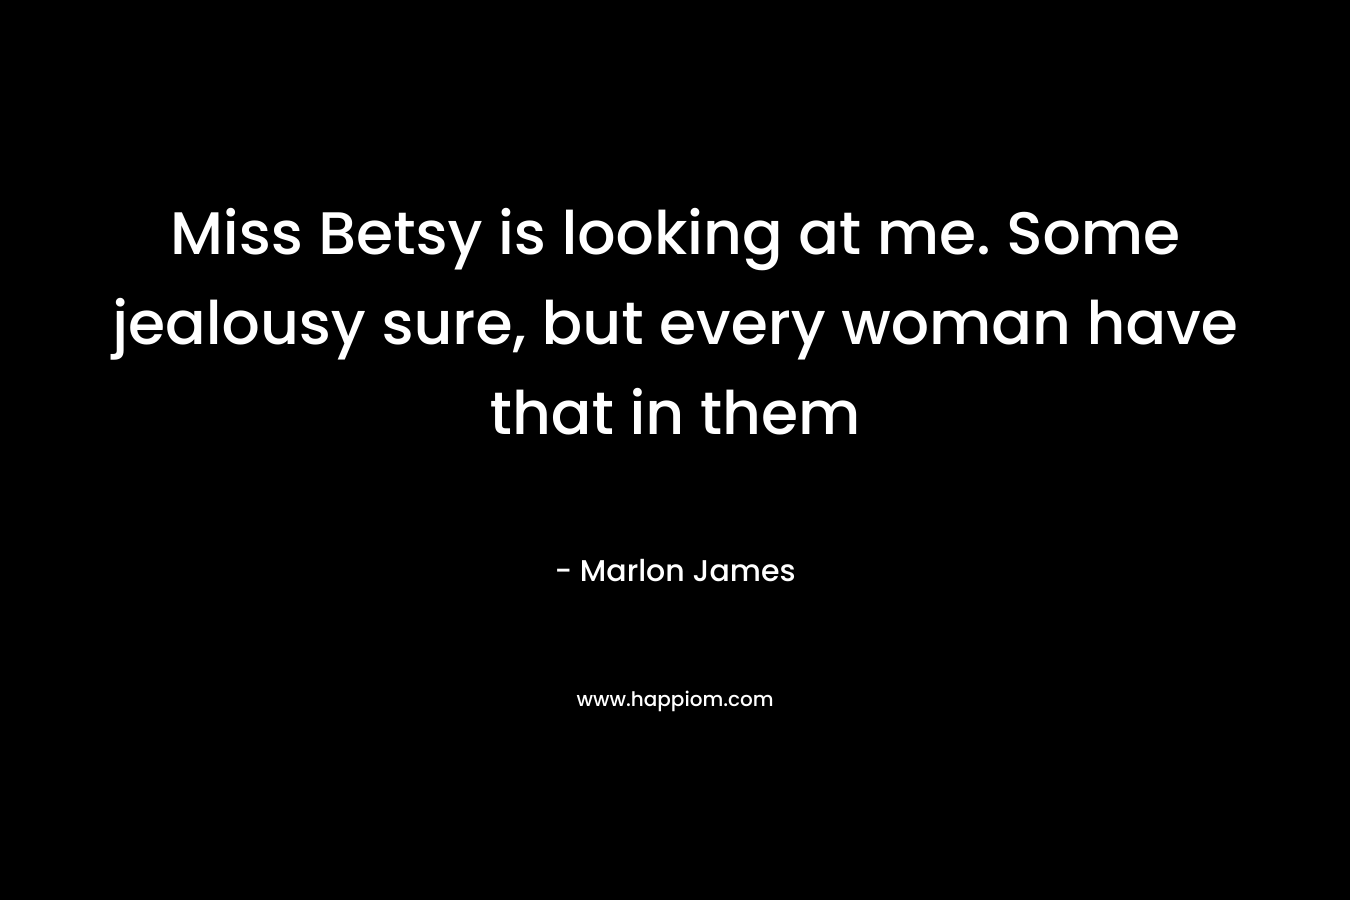 Miss Betsy is looking at me. Some jealousy sure, but every woman have that in them